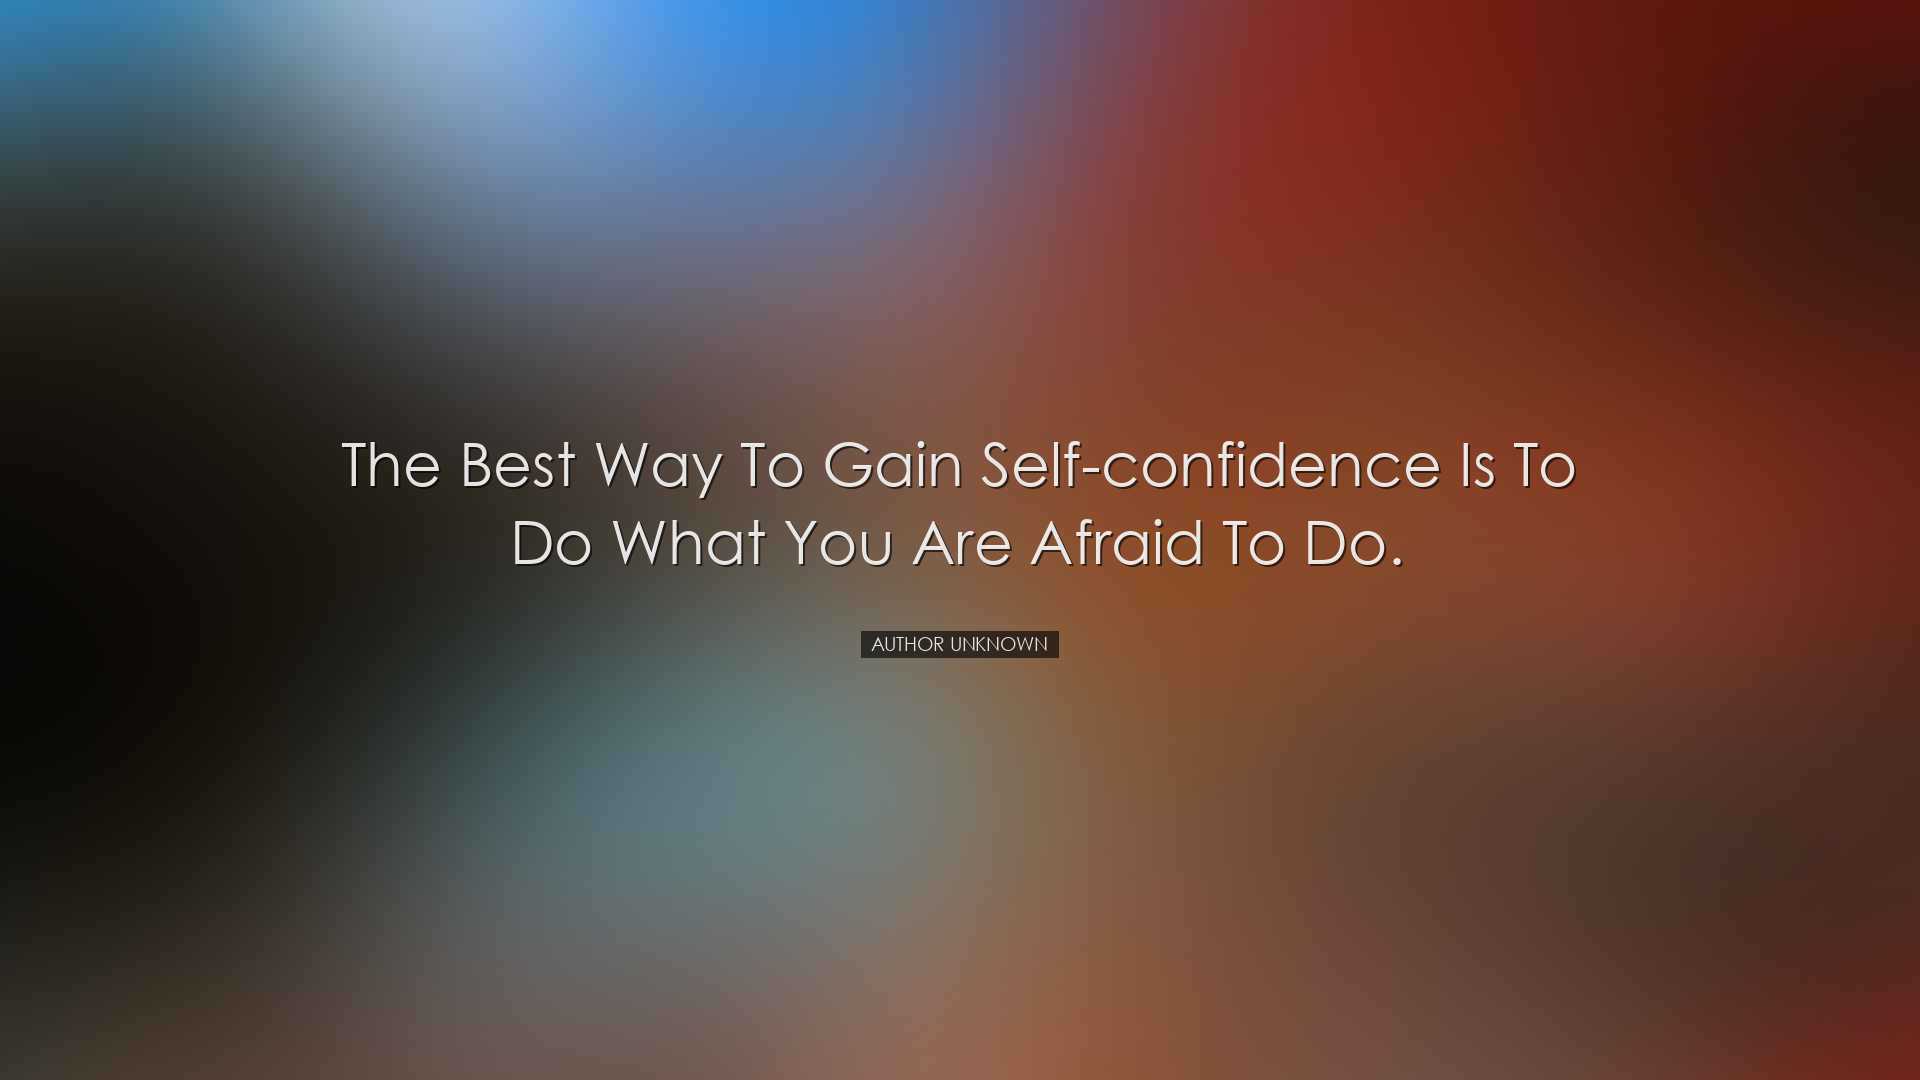 The best way to gain self-confidence is to do what you are afraid